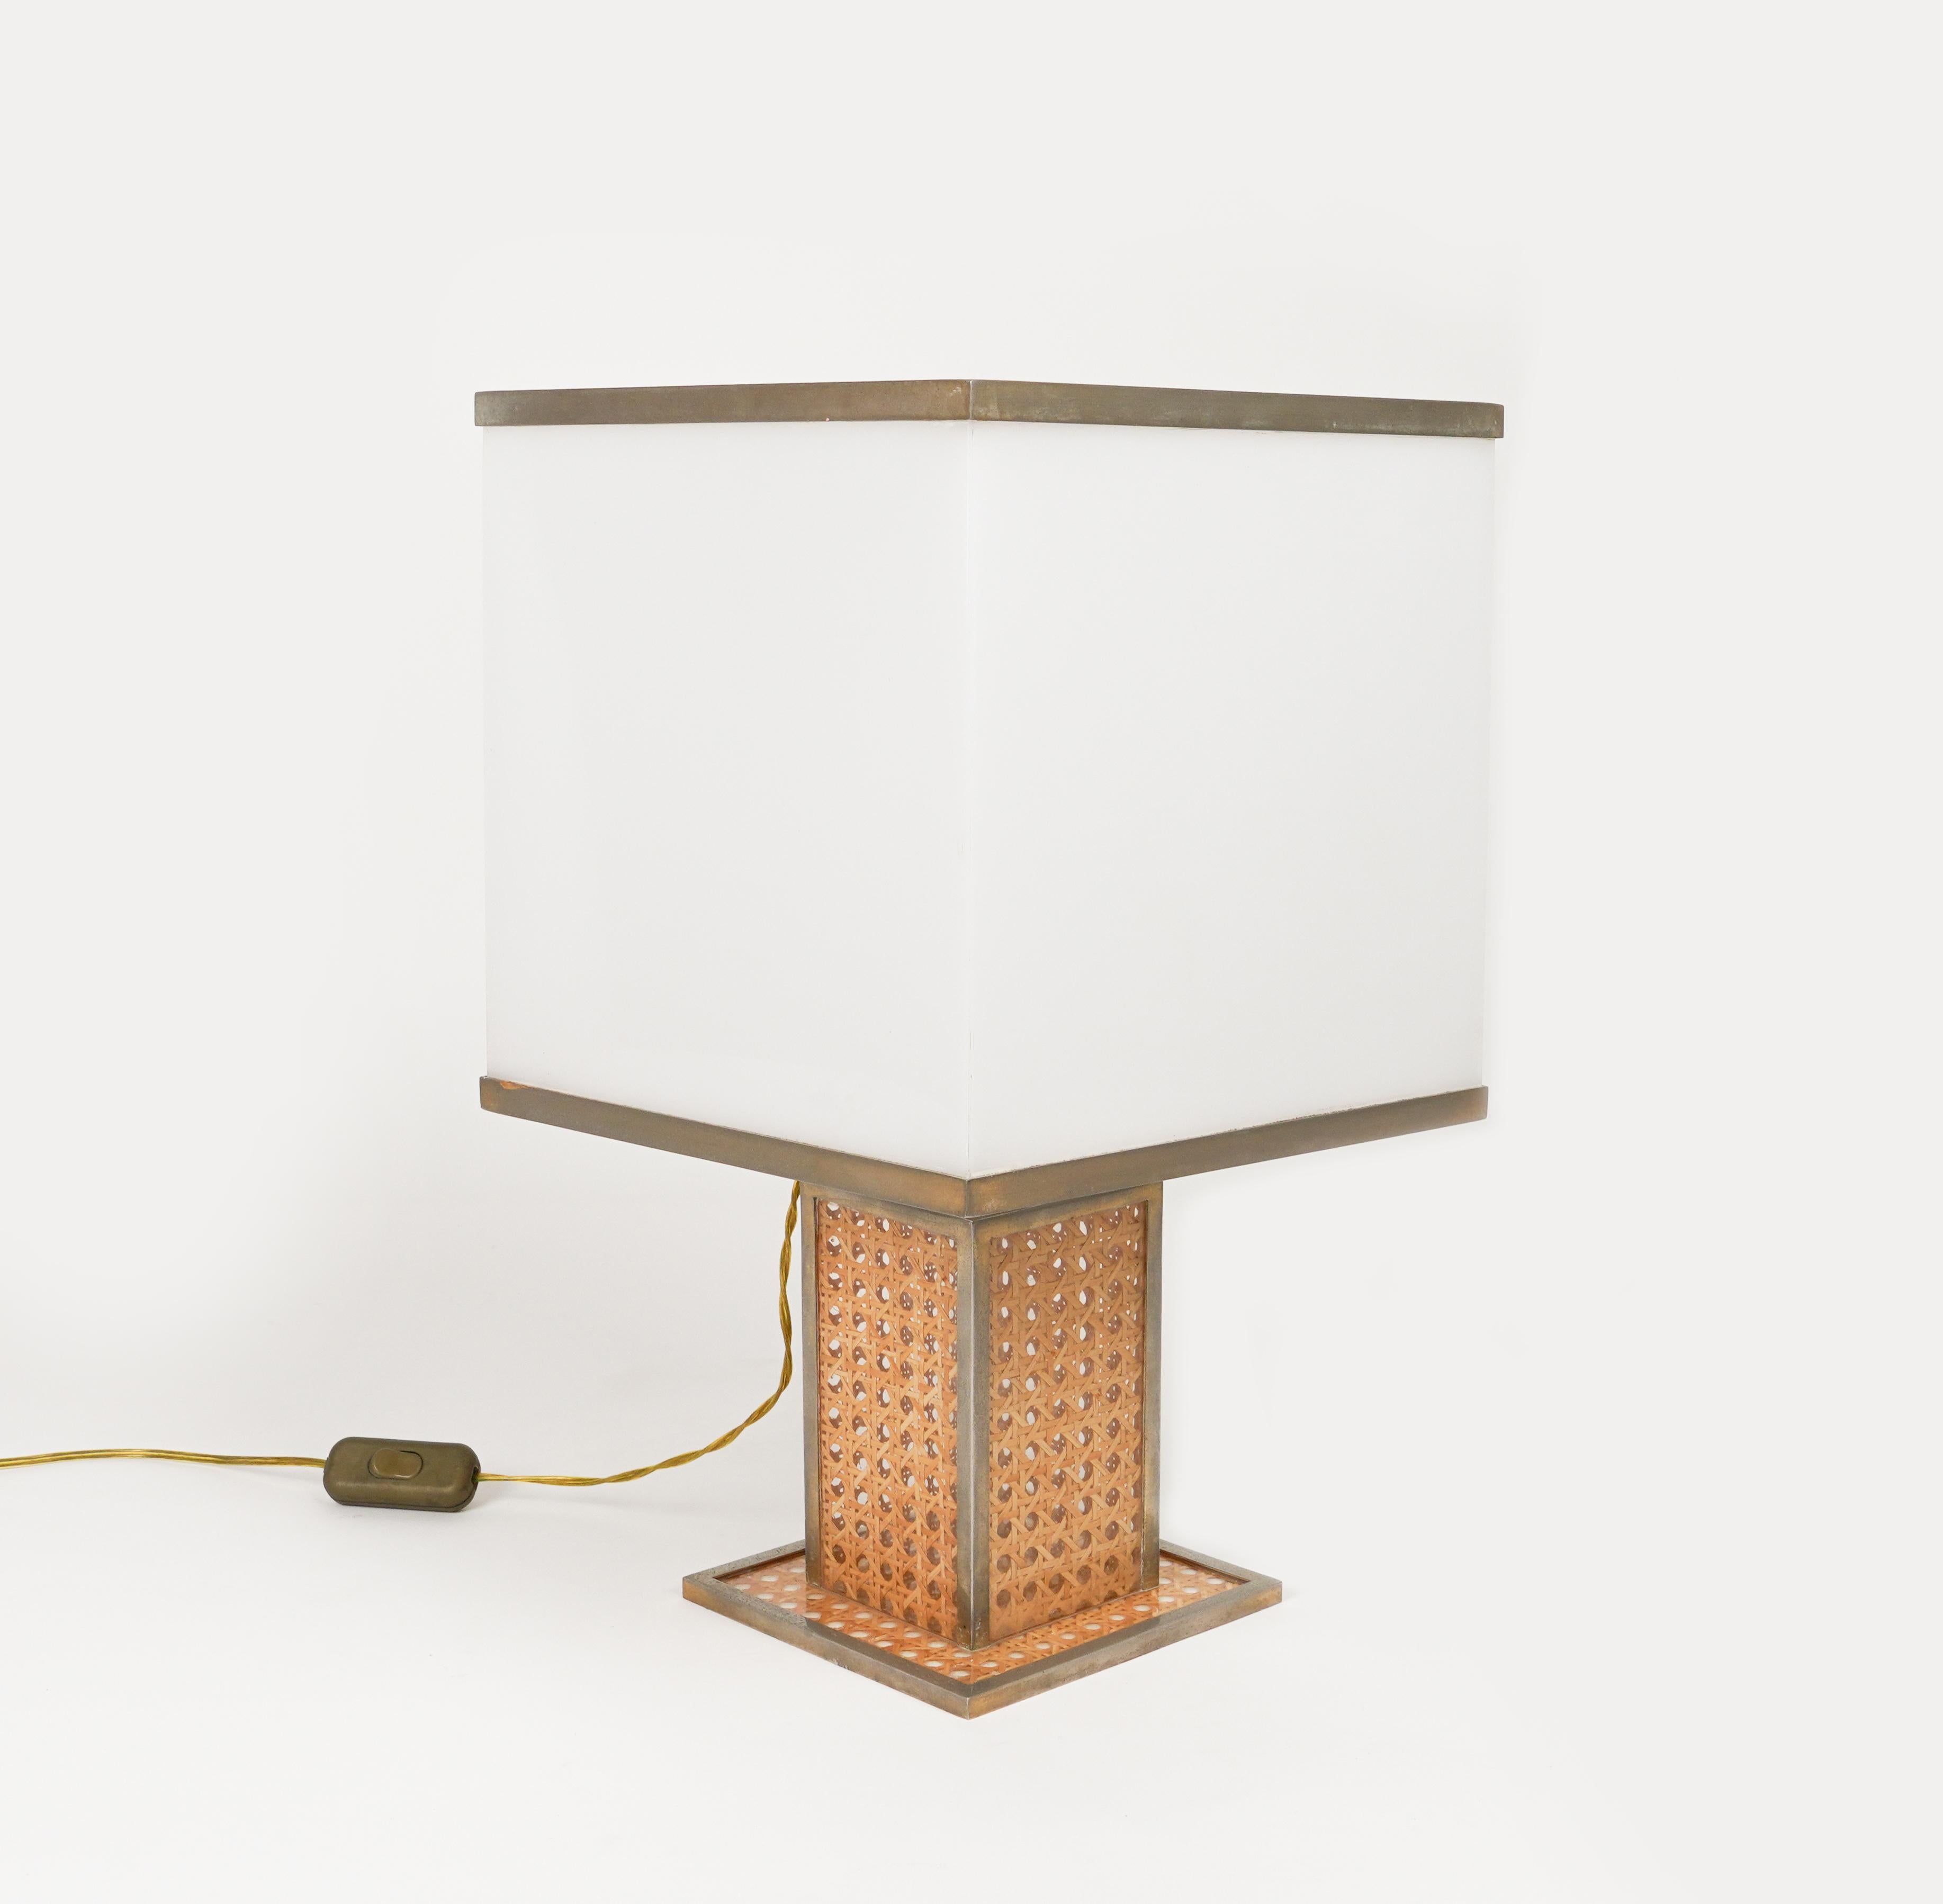 Midcentury amazing table lamp in lucite, rattan and silvered brass whit acrylic Lampshade and silvered brass in the style of Christian Dior.

Made in Italy in the 1970s.

A beautiful lamp that is perfectly working but most of all, it provides an